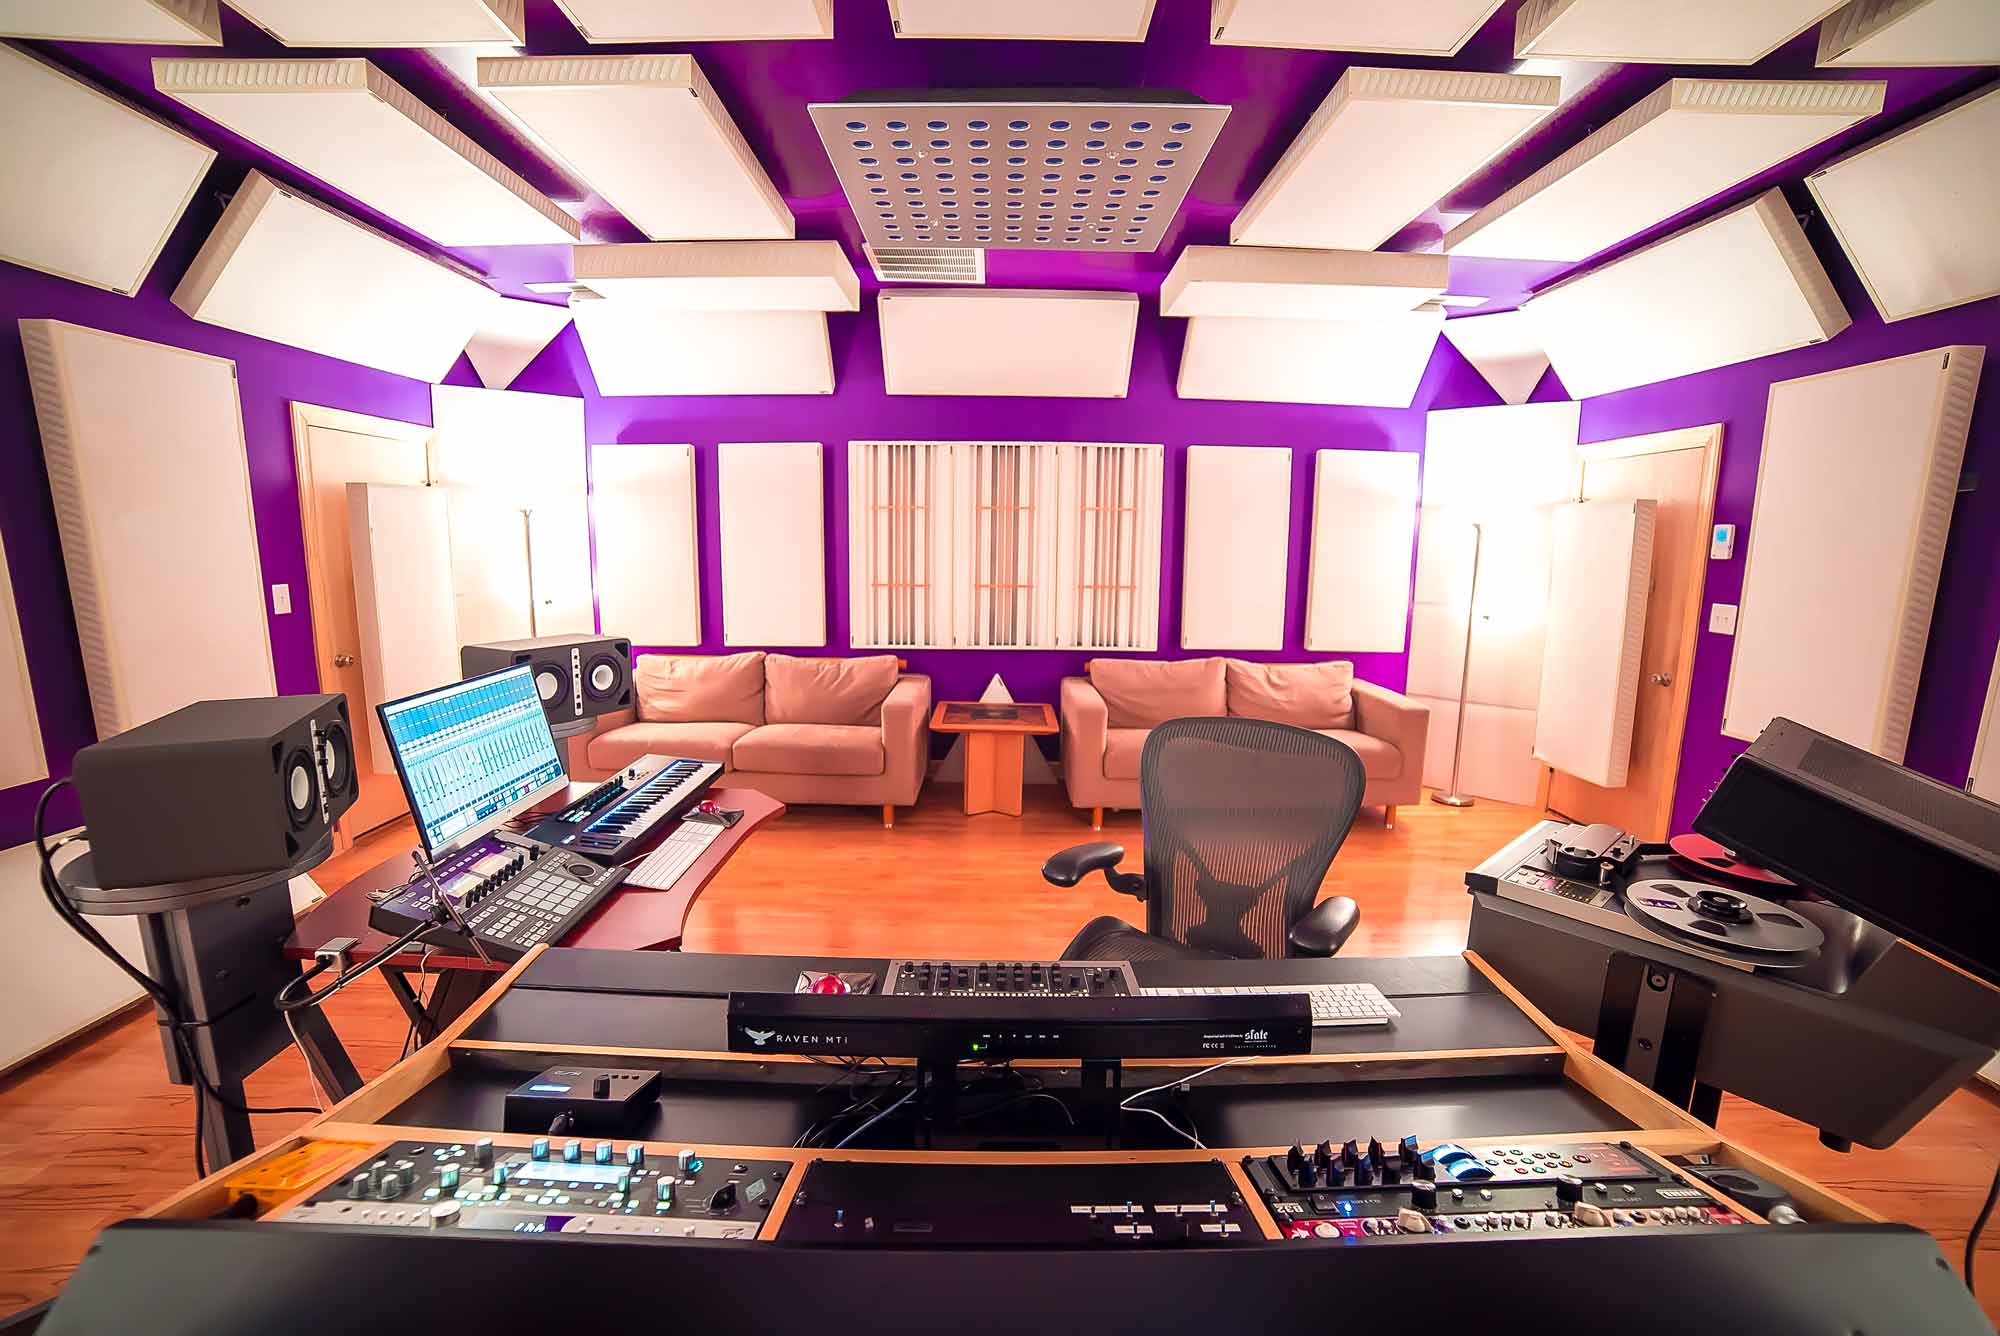 Cphonic Mastering contact page photo from behind desk